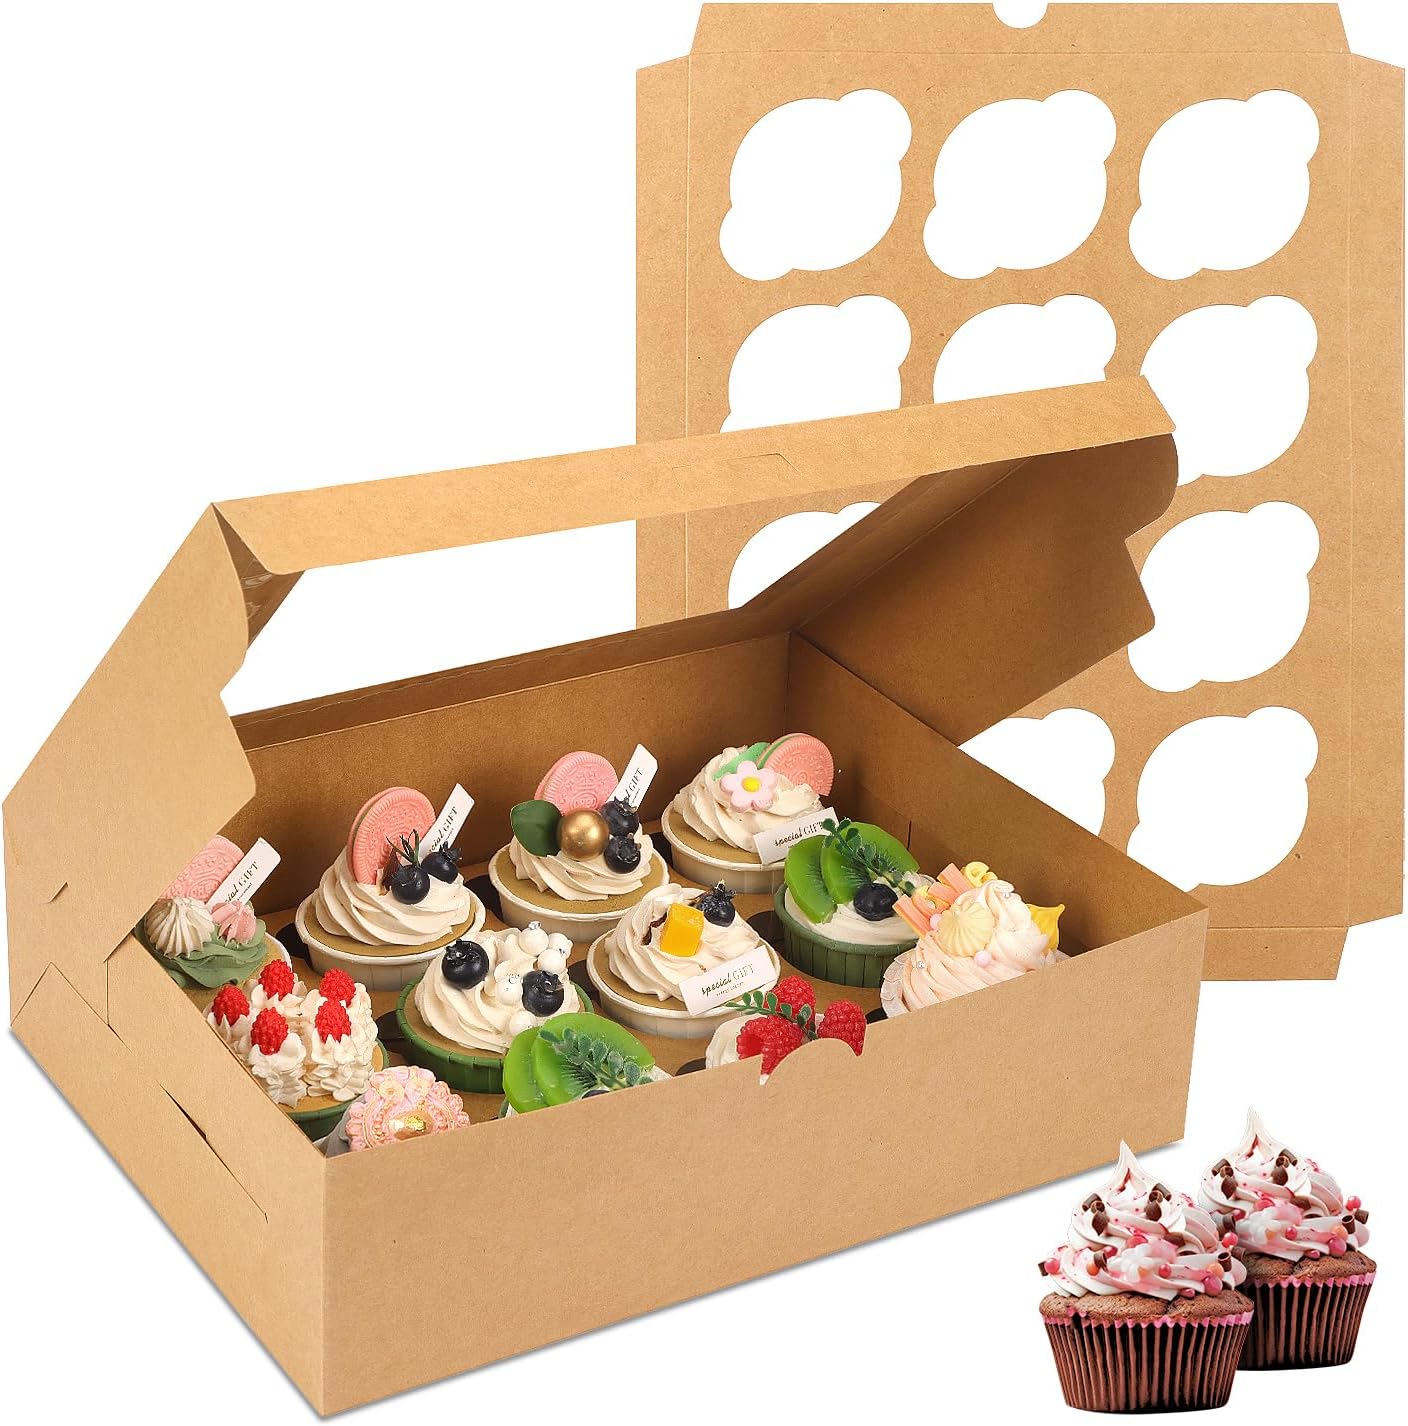 I ordered these boxes for my baking business and they do not disappoint! The box design is a rustic brown kraft box and fits a dozen cupcakes perfectly. They stay in their place and are covered completely. I wrap a ribbon around it for a nice presentation. The bottom is a bit flimsy, but still holds up nicely.